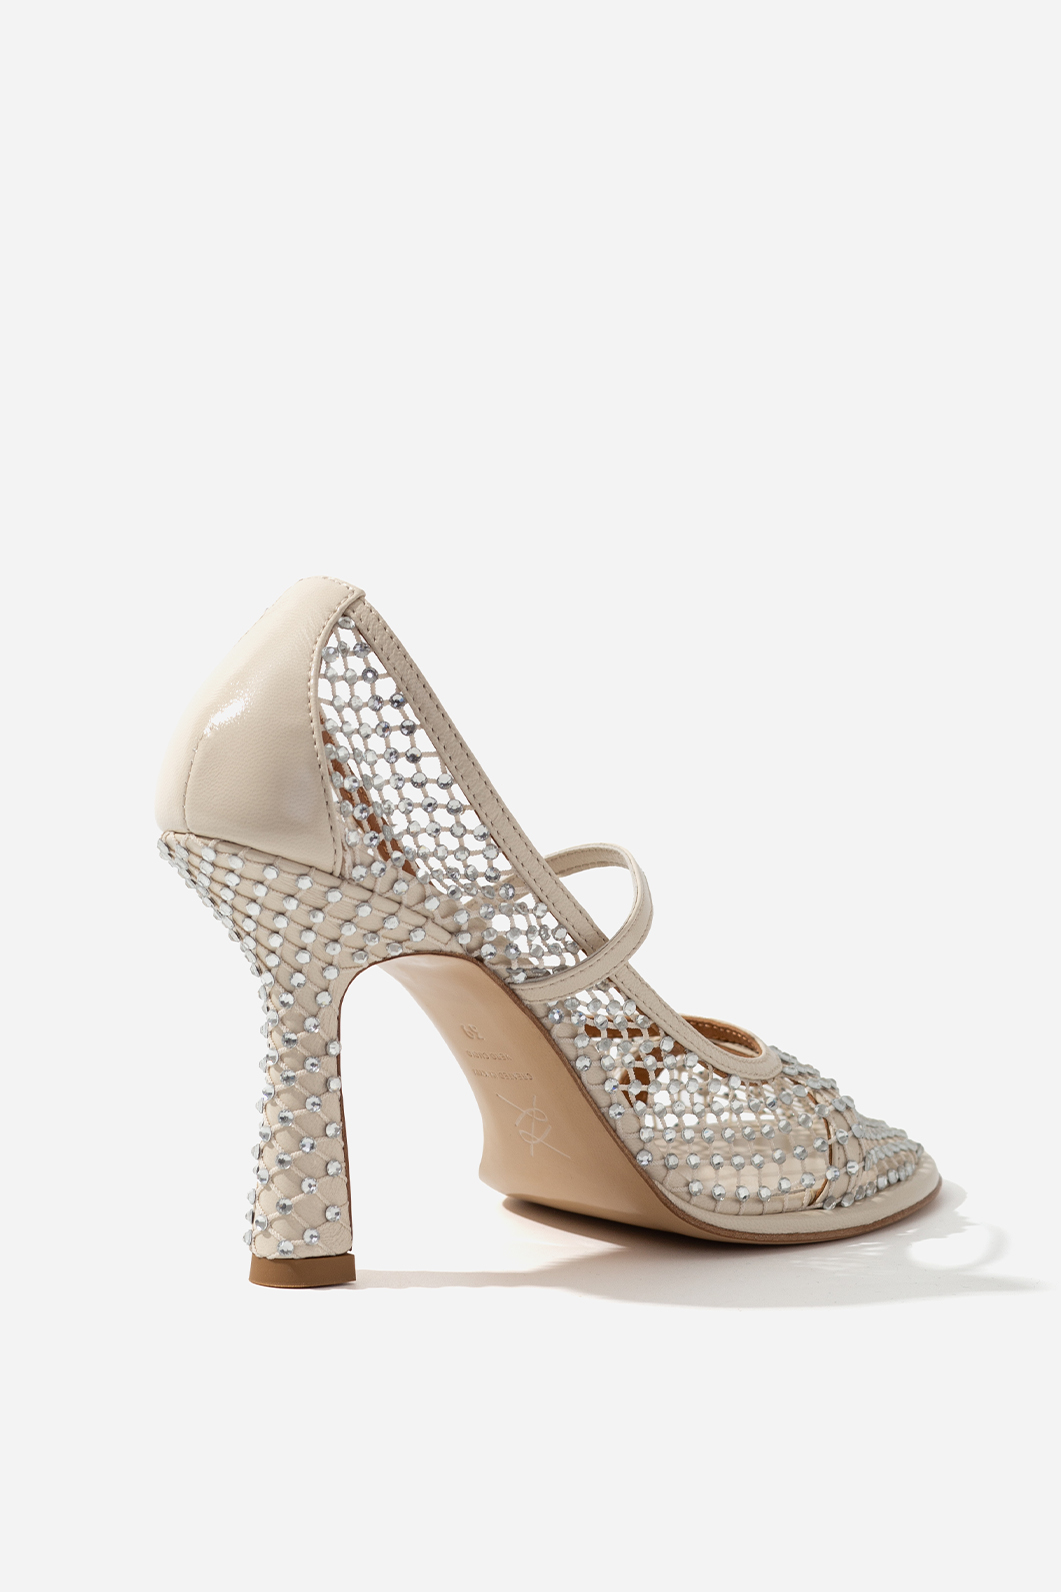 Jerry milky leather with Swarovski crystals pumps